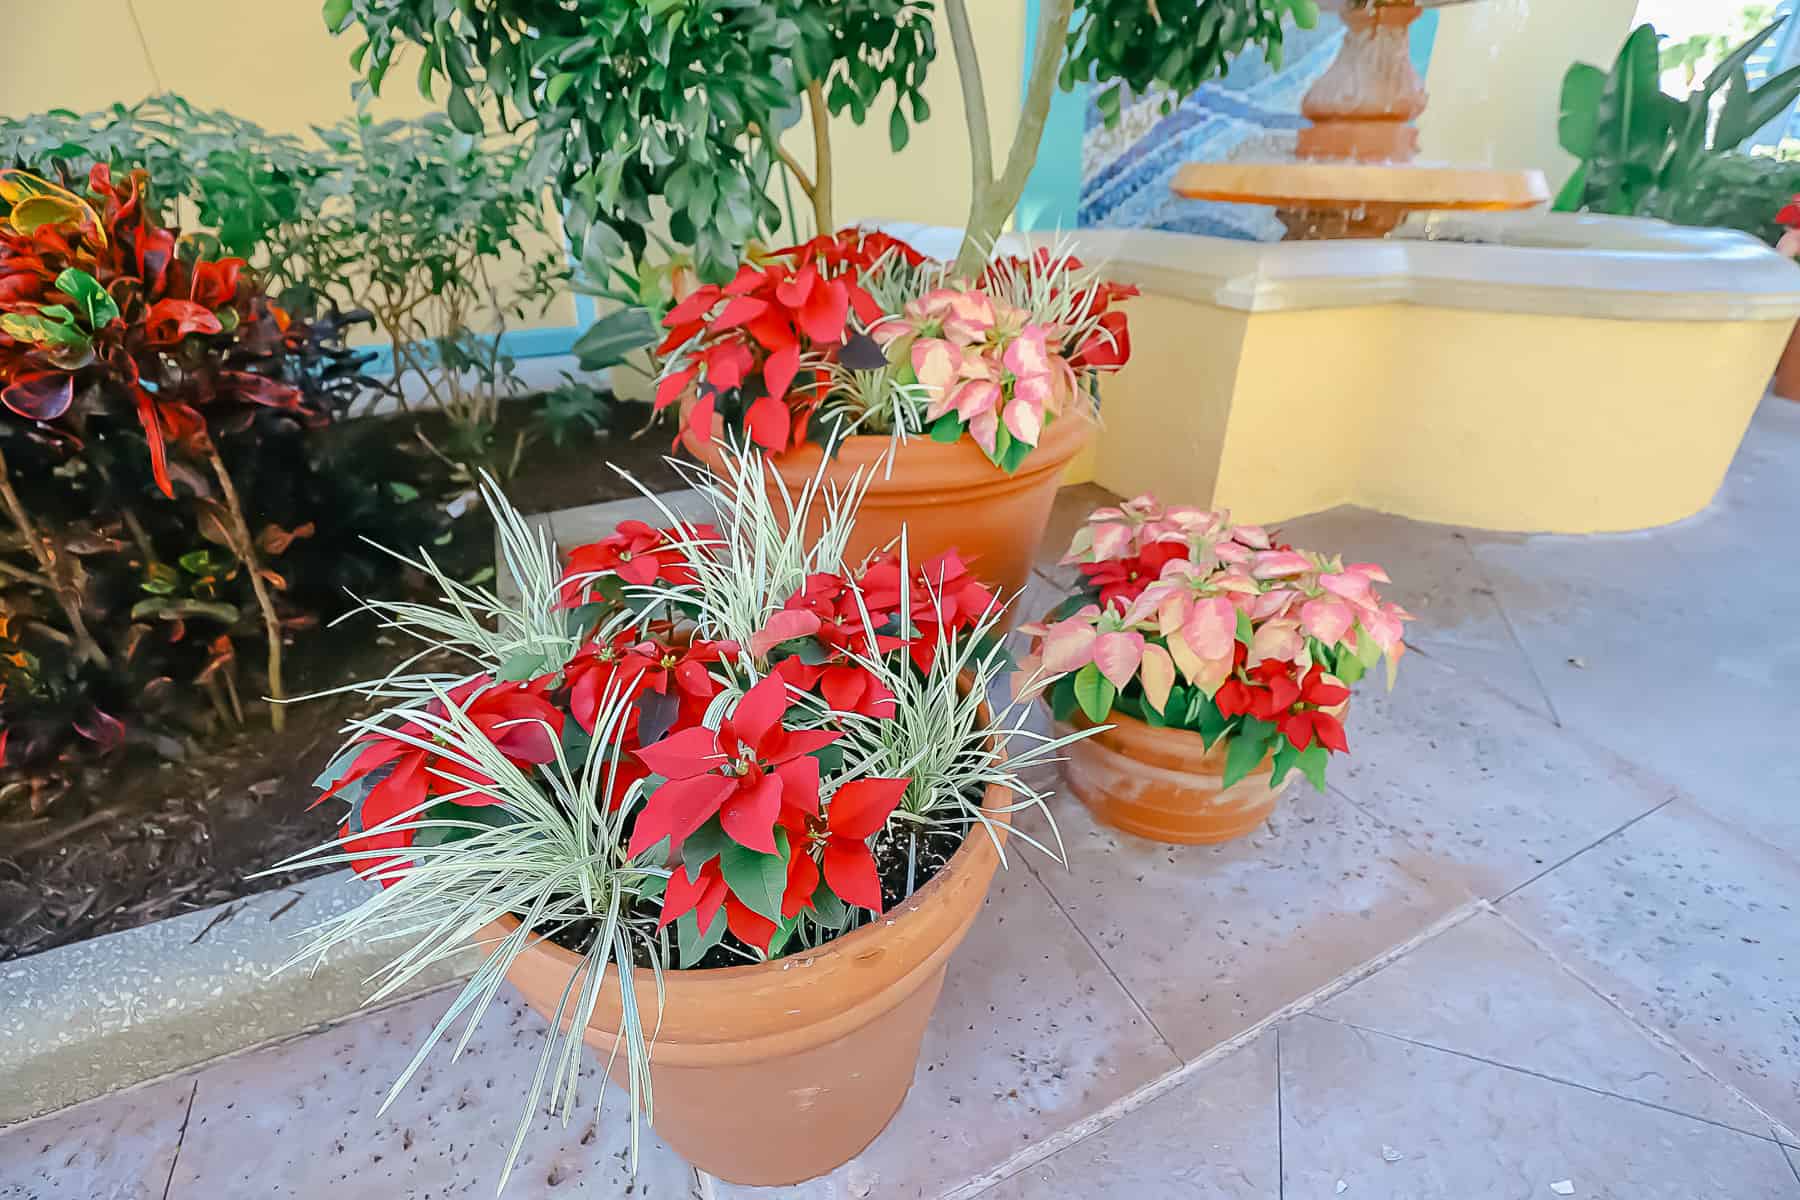 A close-up of the red and peach poinsettias.